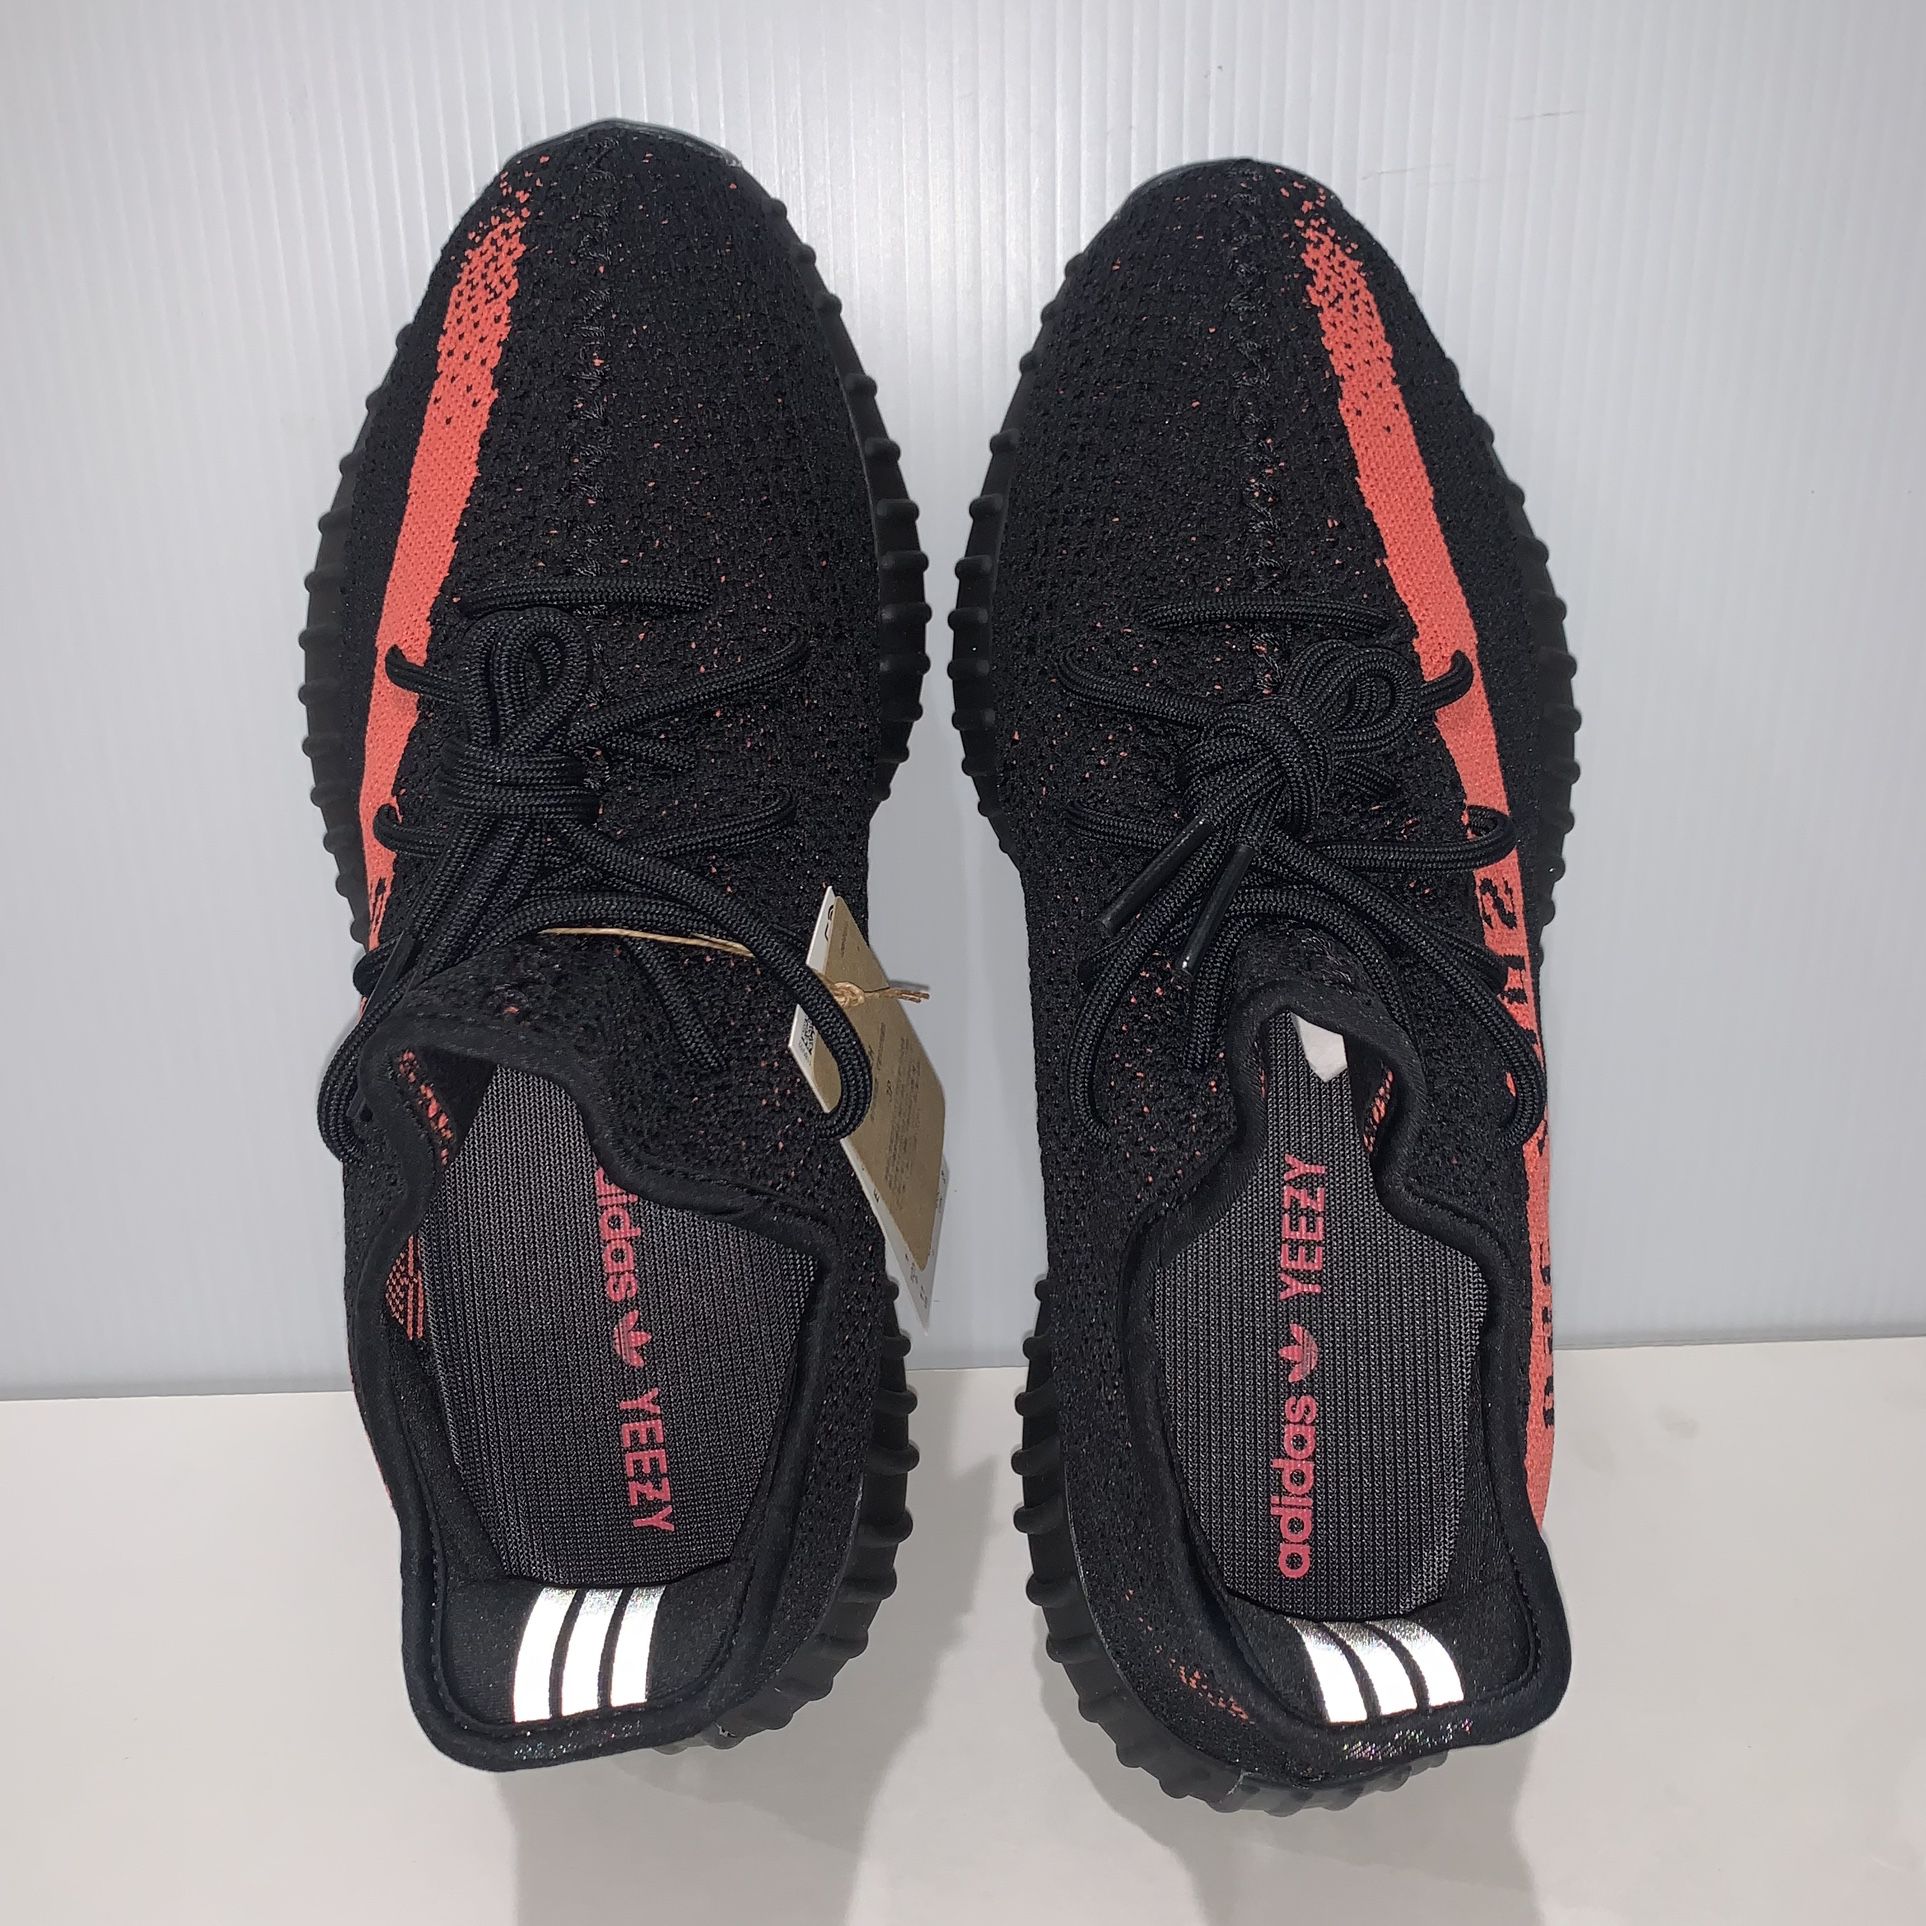 Supreme x adidas Yeezy Boost 350 V2 Red White F36923 Free Shipping